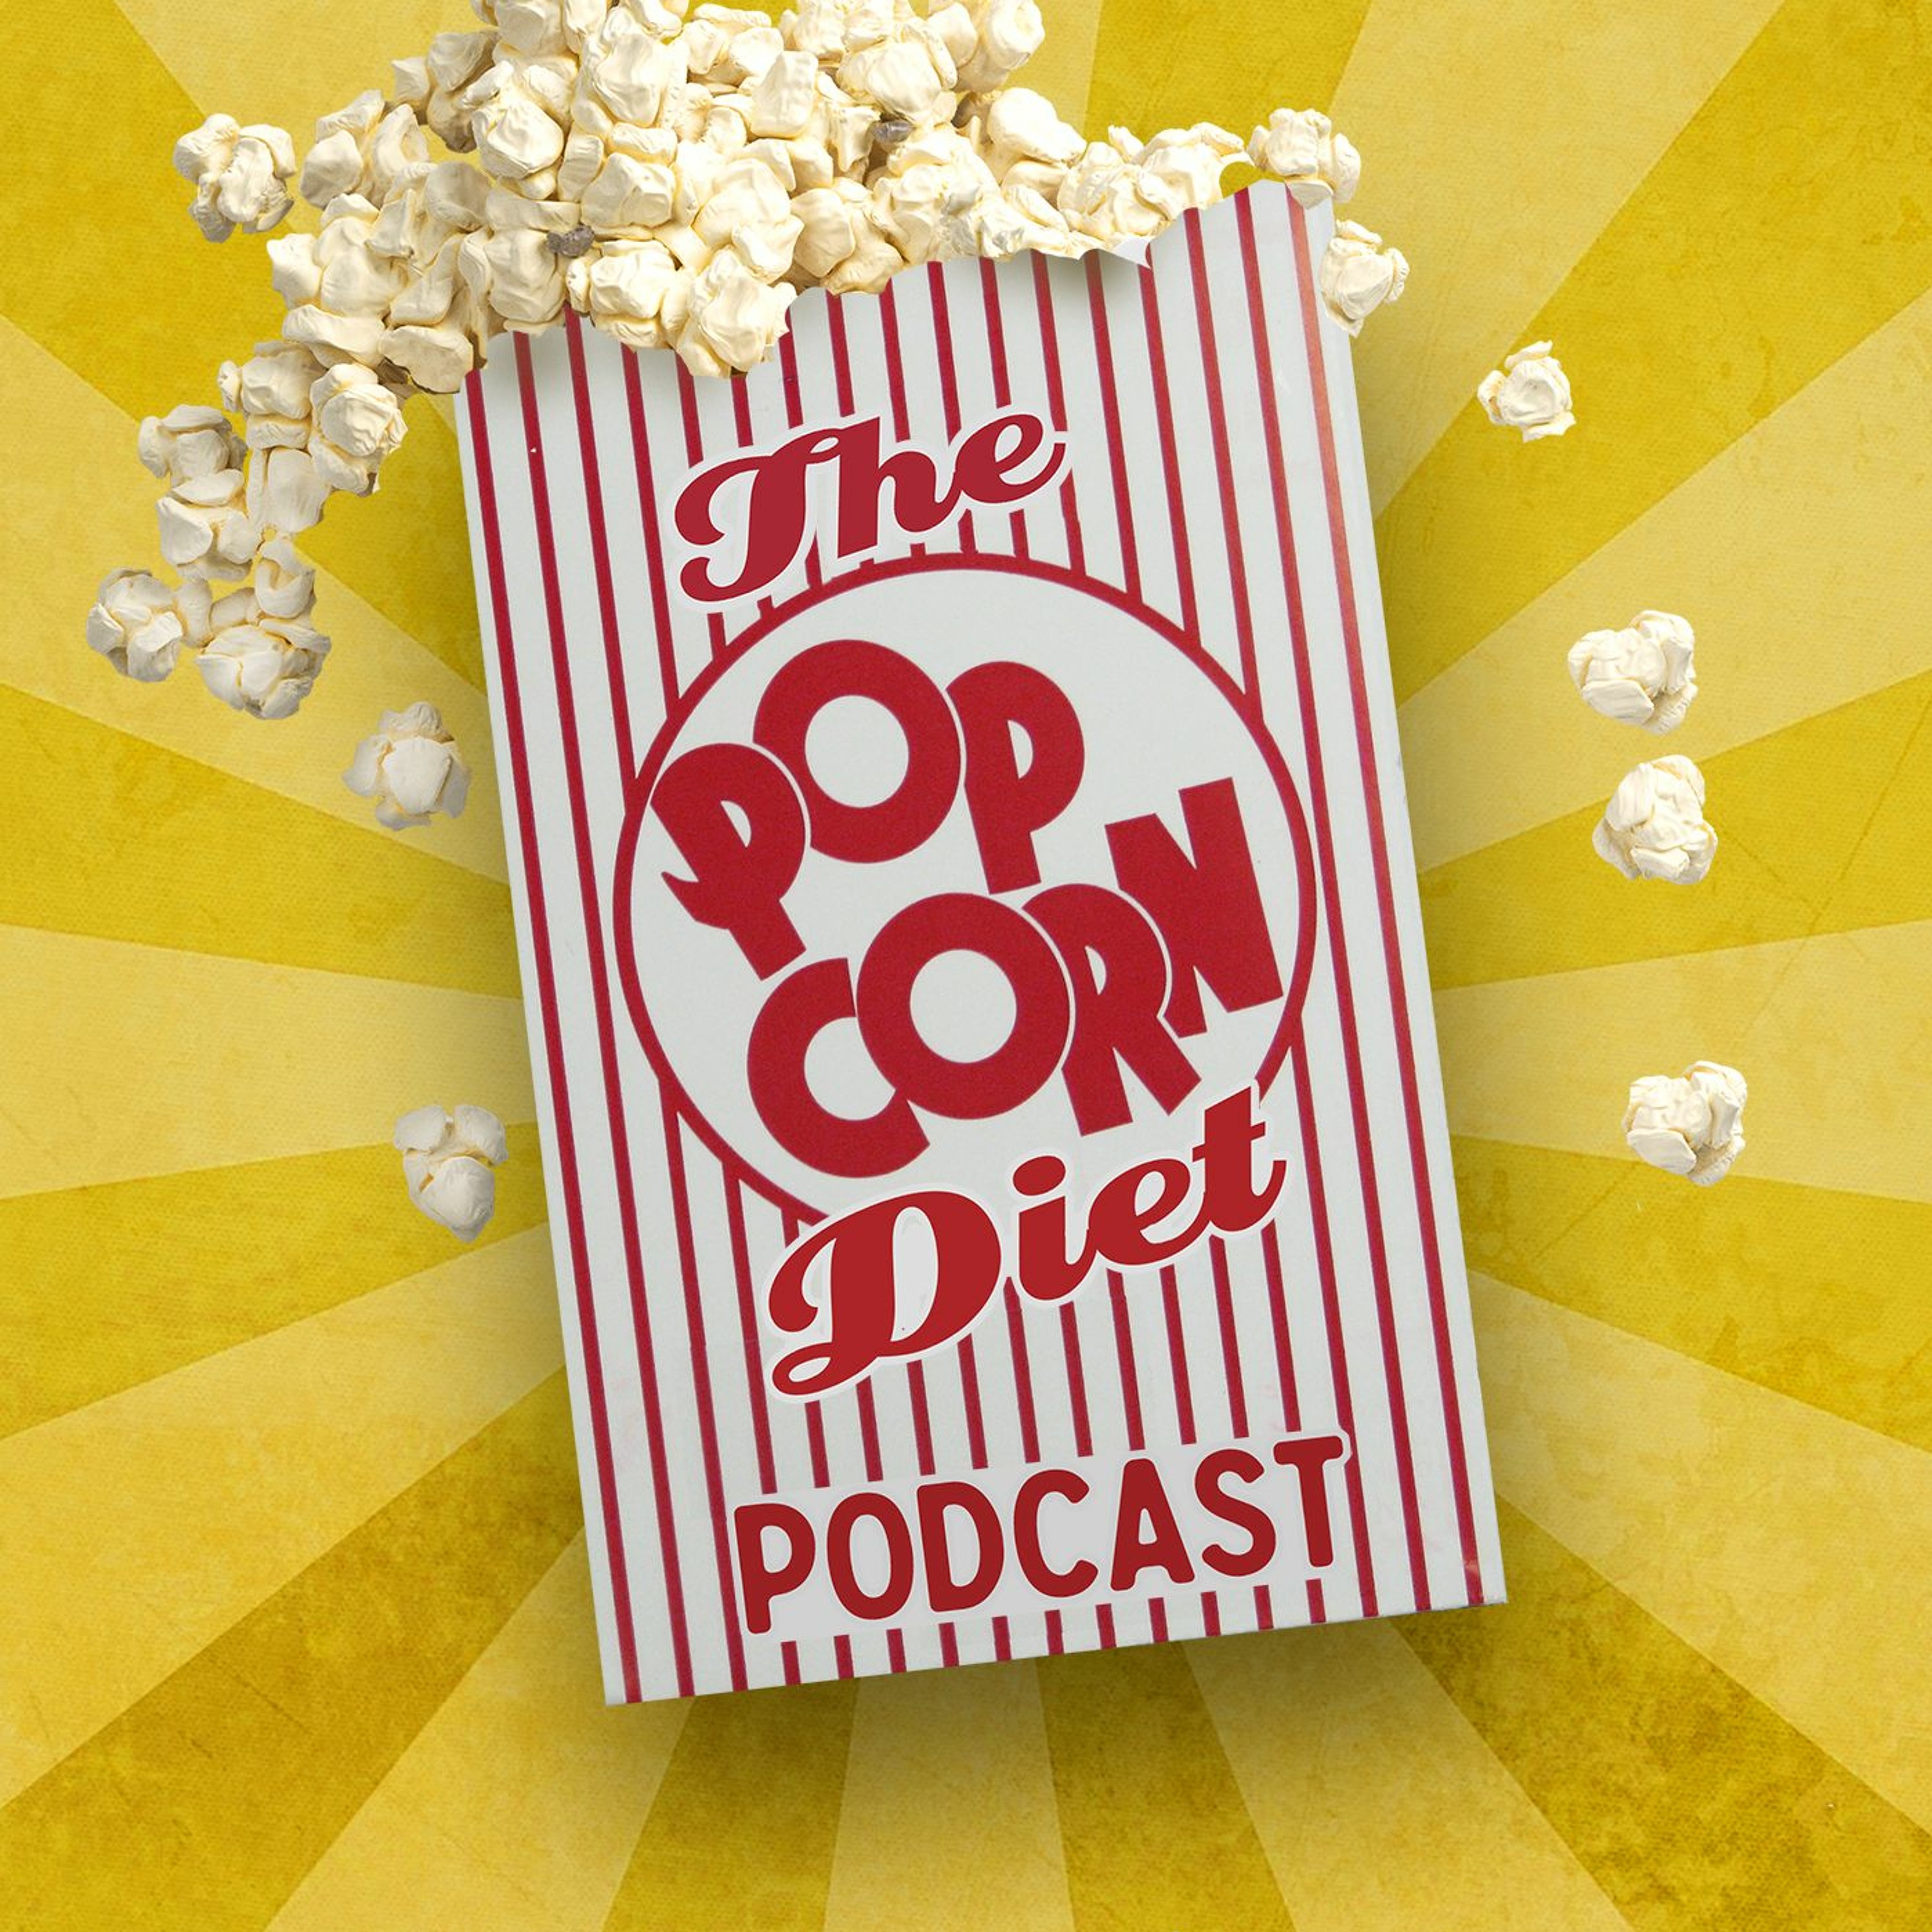 Ep. 28 - In The Heart of Oscar / Perfectly Timed Oscar Predictions